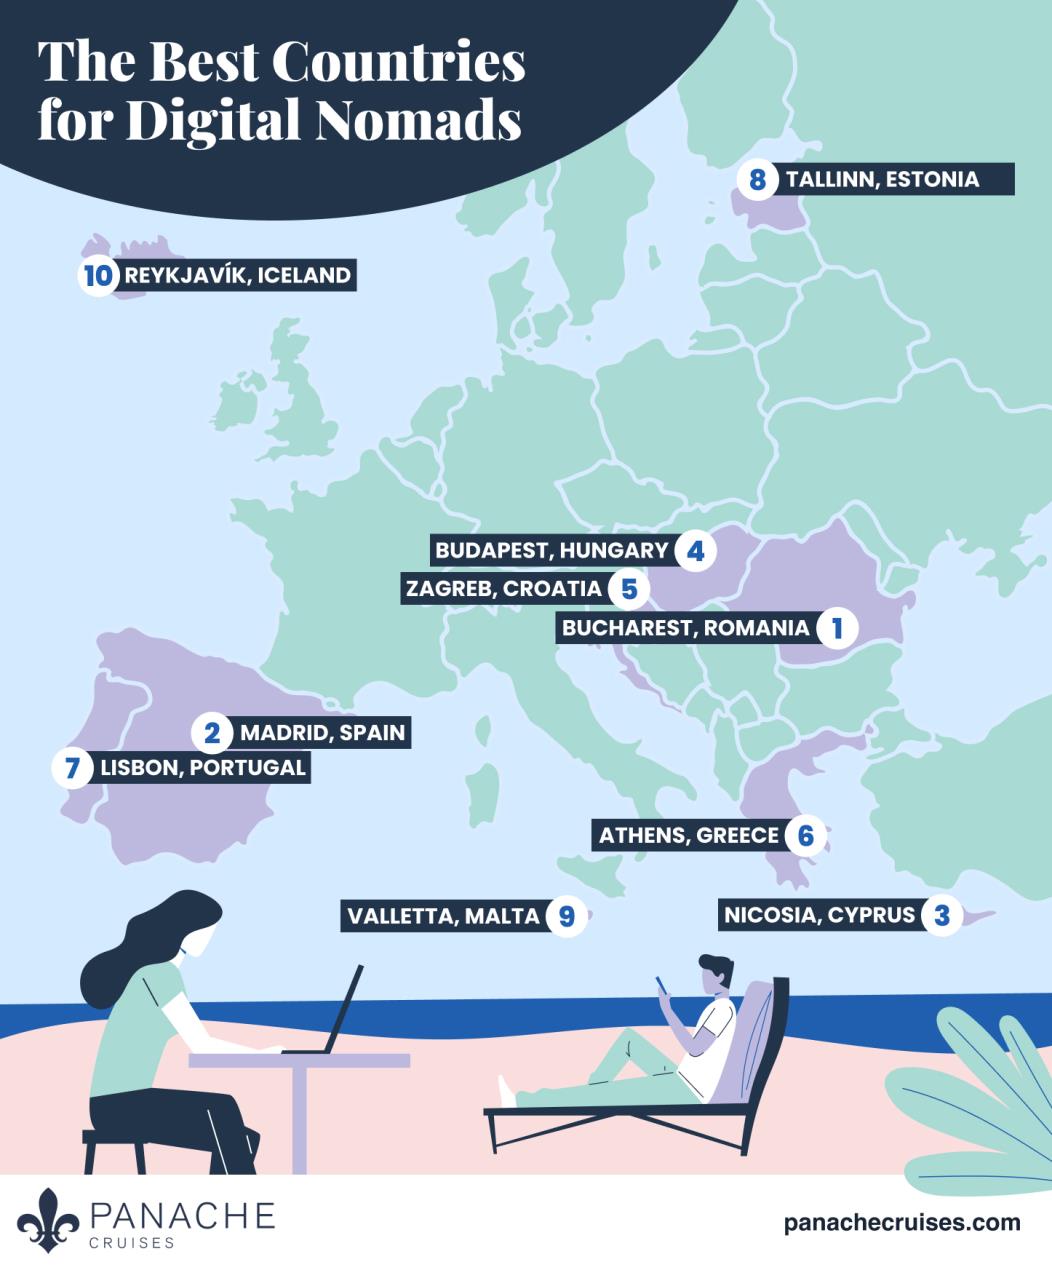 Panache - The Best Countries for Digital Nomads